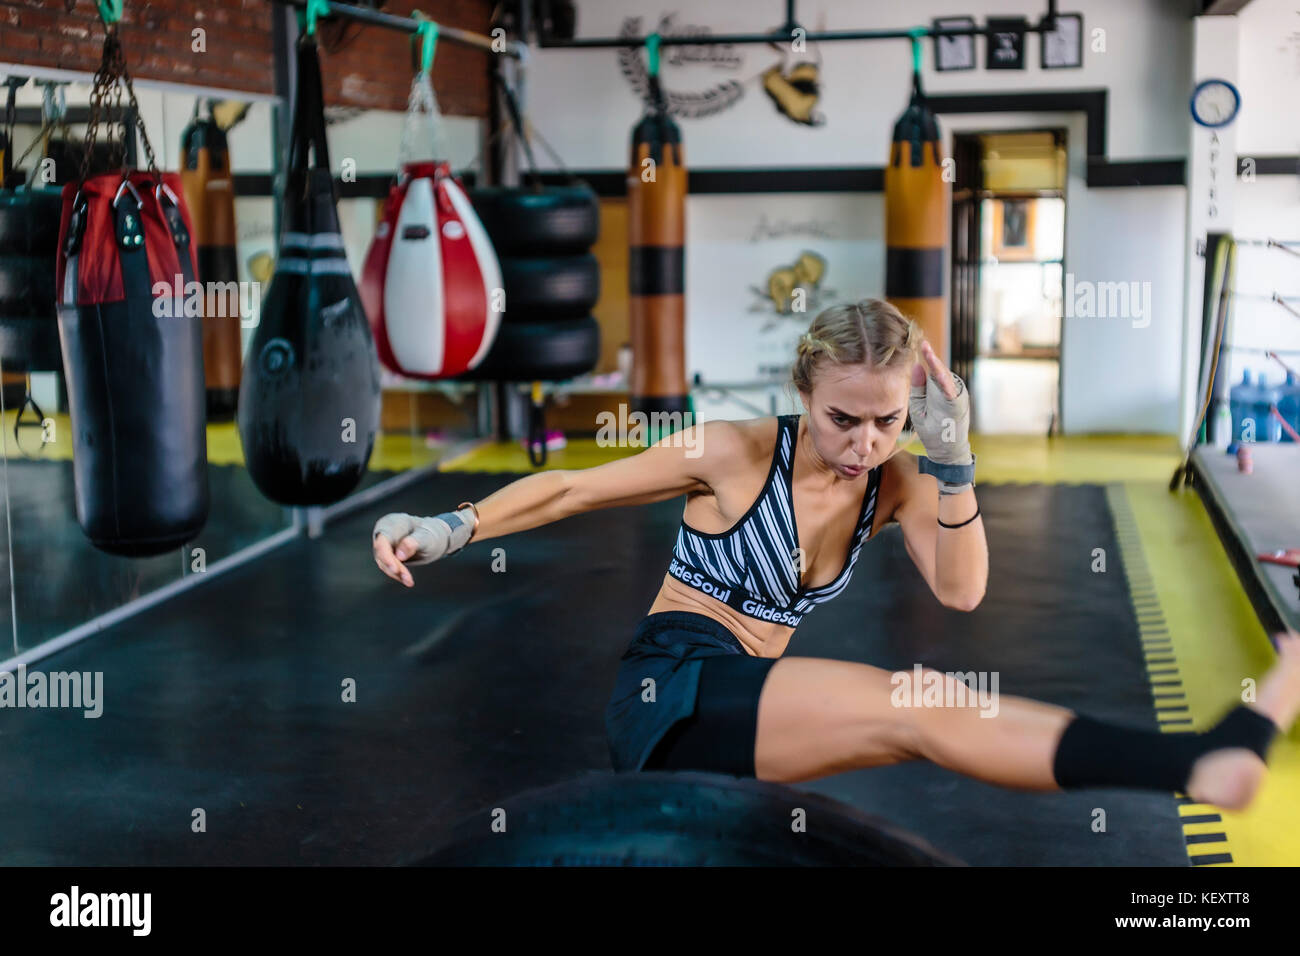 Photograph of young woman in gym kicking while practicing kickboxing, Seminyak, Bali, Indonesia Stock Photo